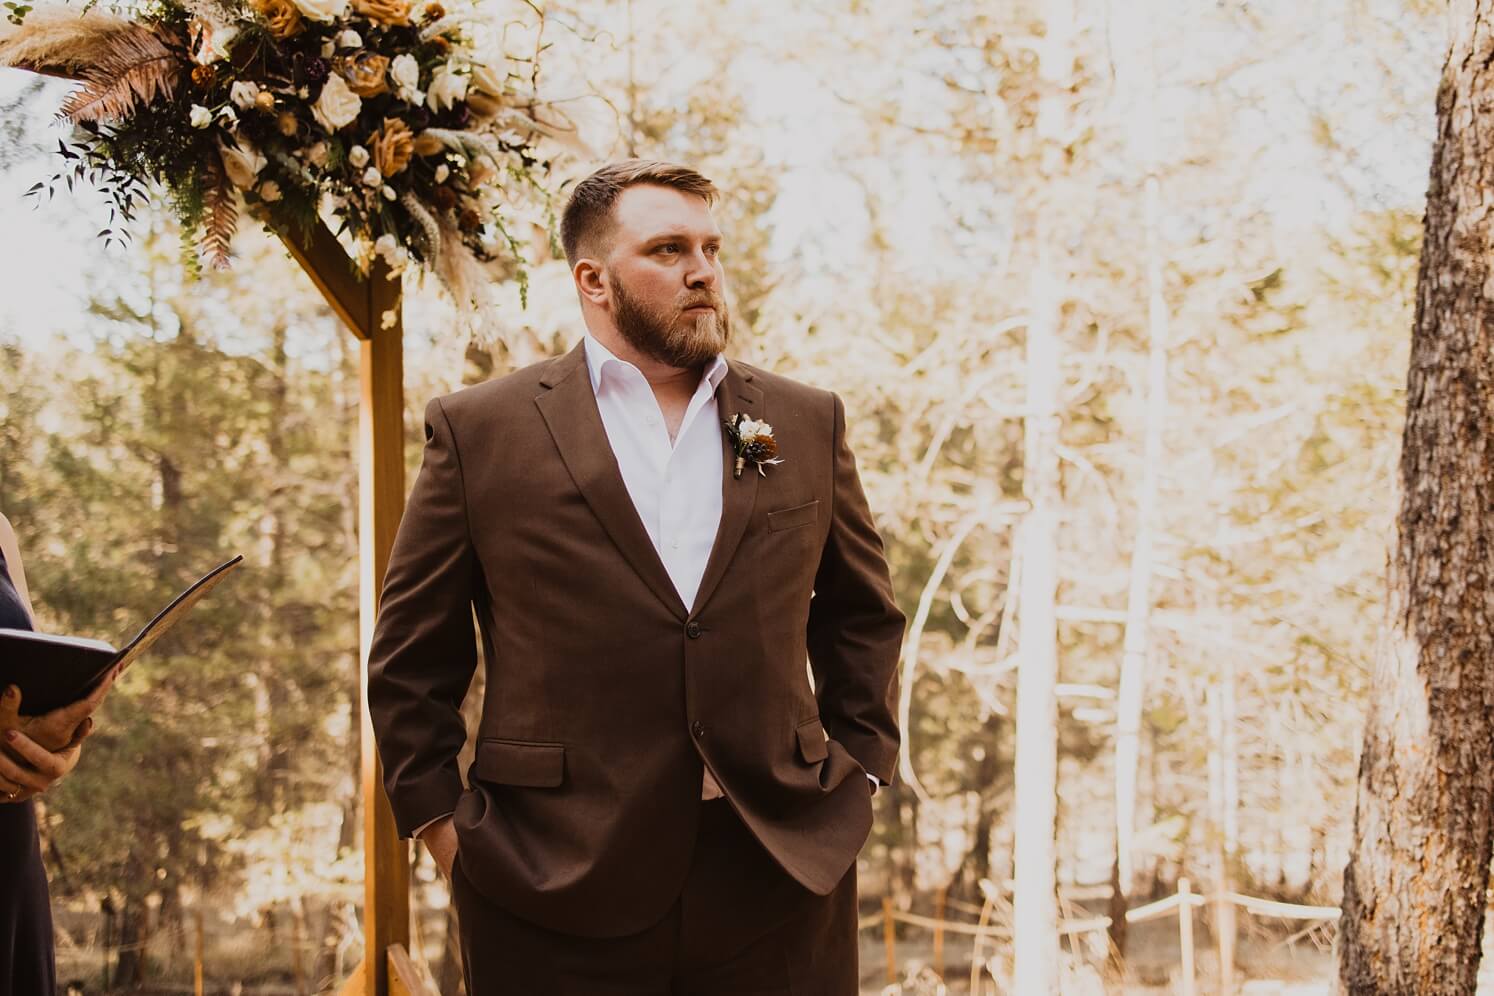 Groom standing at altar watching bride walk down the aisle | McArthur Weddings and Events